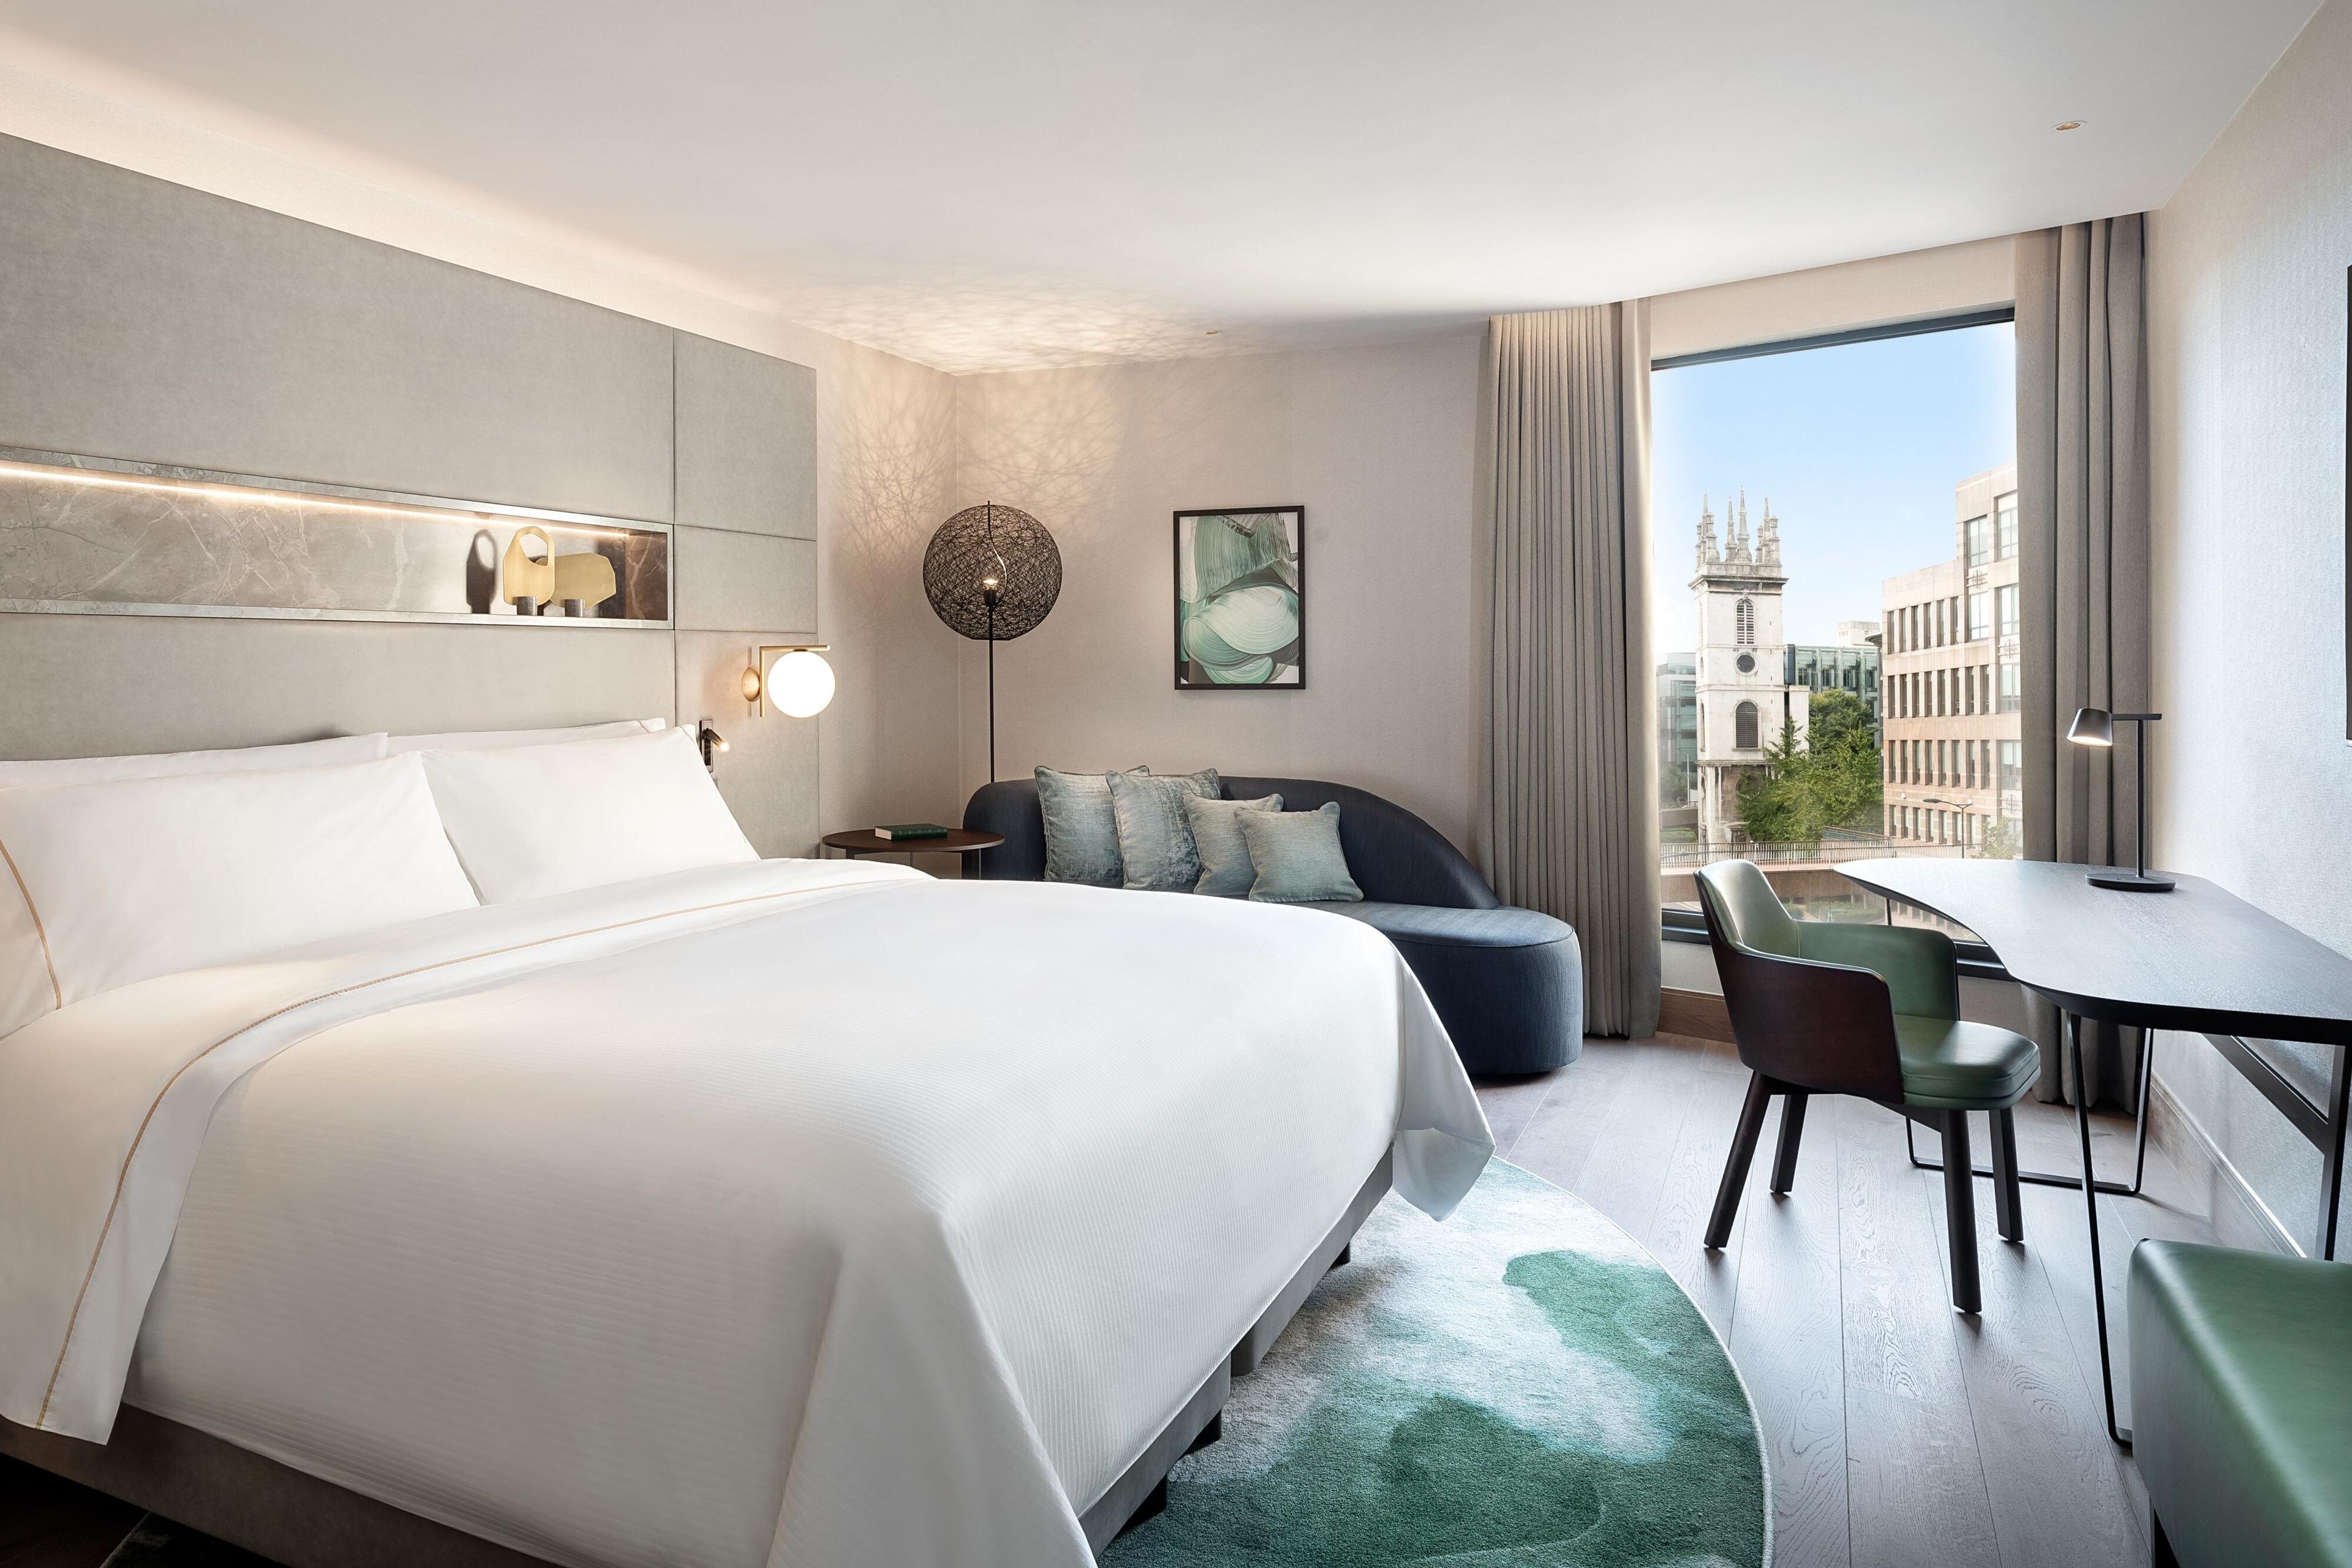 Encompassing modern elegance, guestrooms are completed with Westin's signature Heavenly Bed to provide the ultimate comfort.